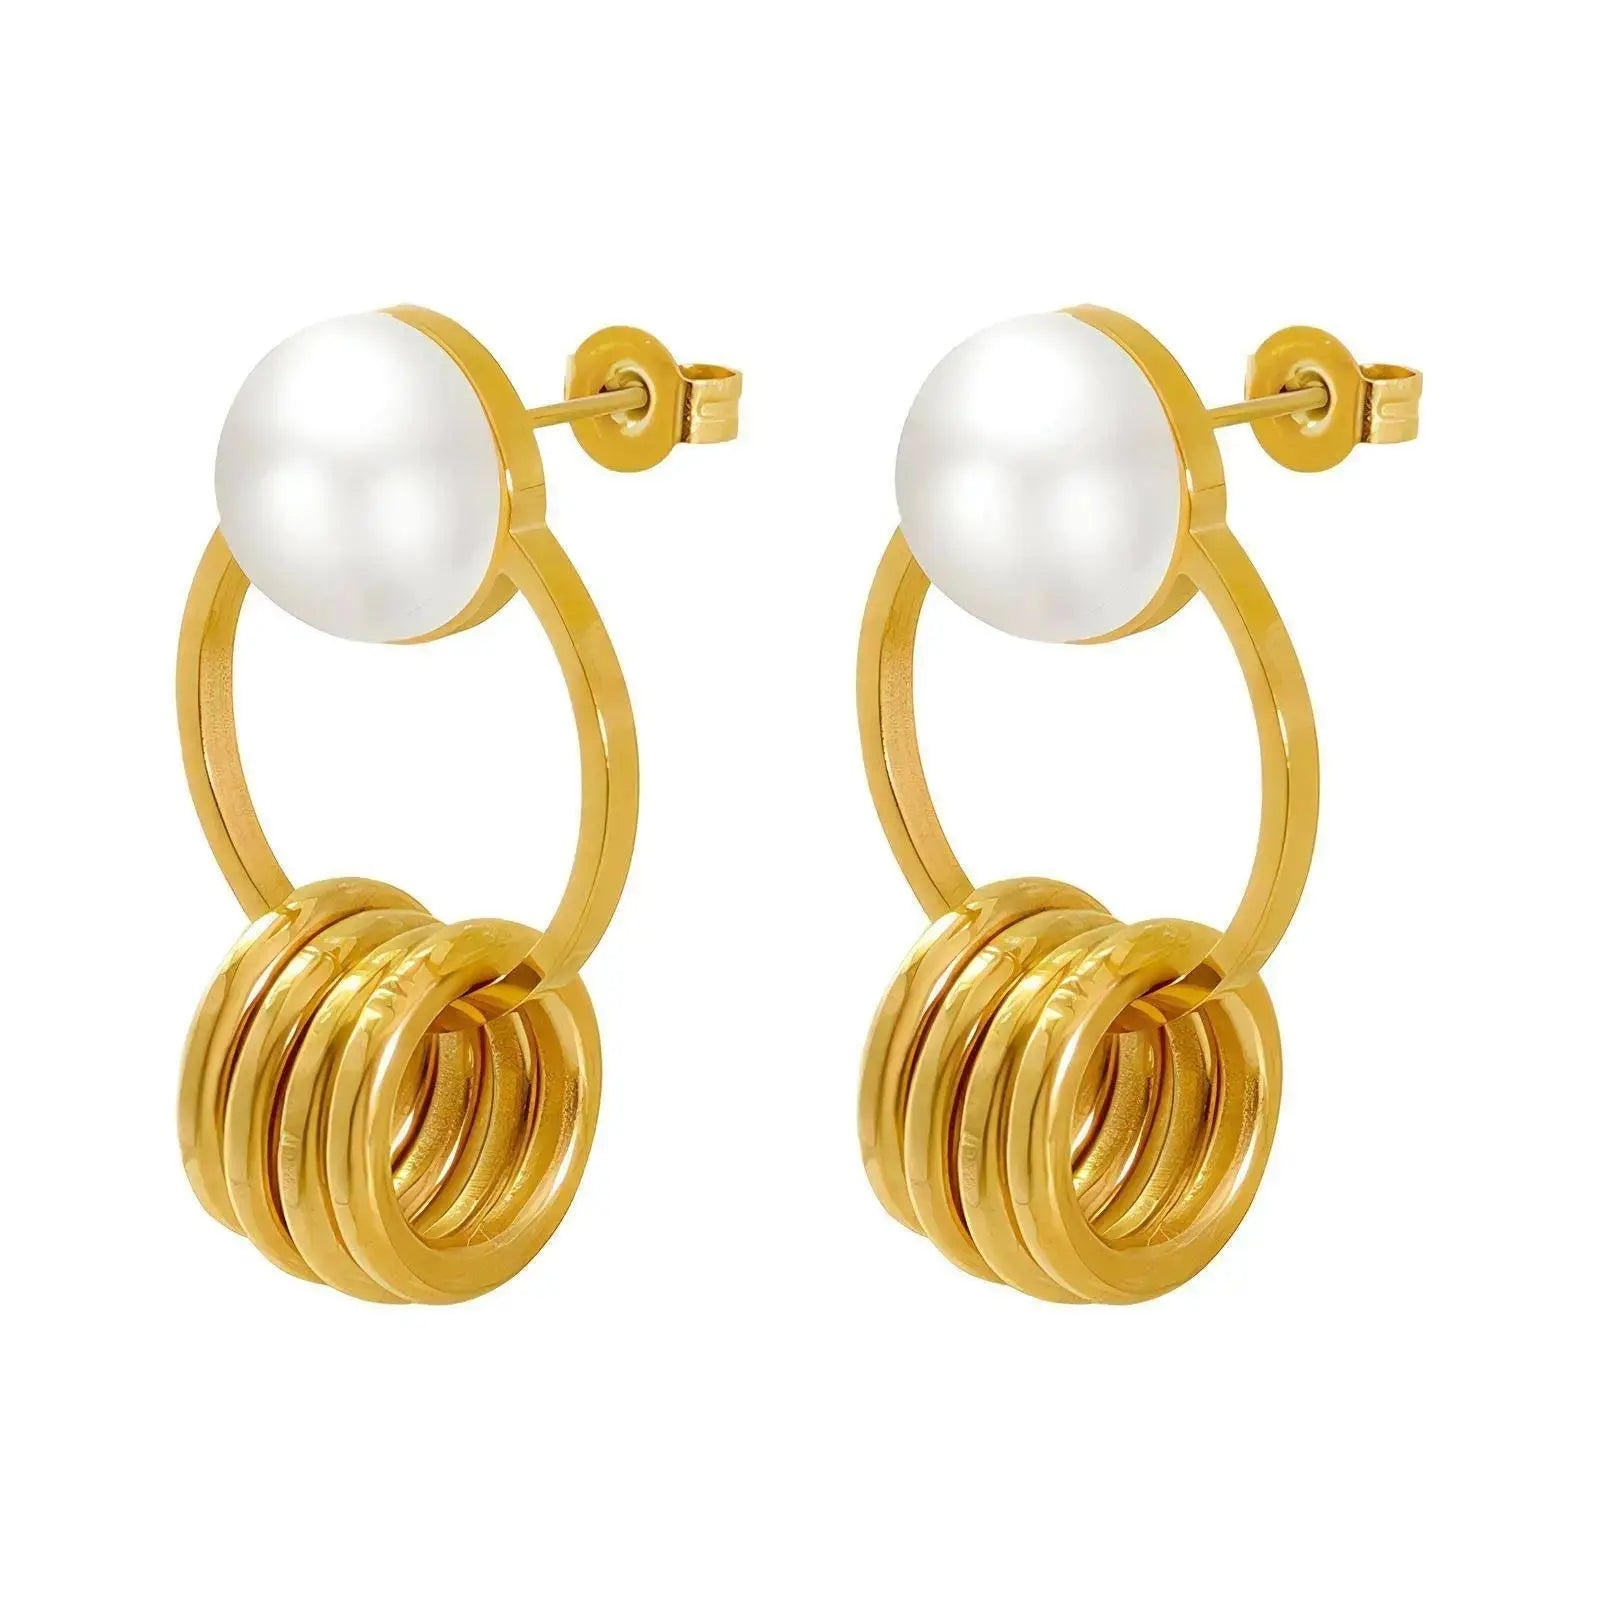 A Big Entrance 18k Gold Plated Stainless Steel Drop Pearl Earrings - Akalia